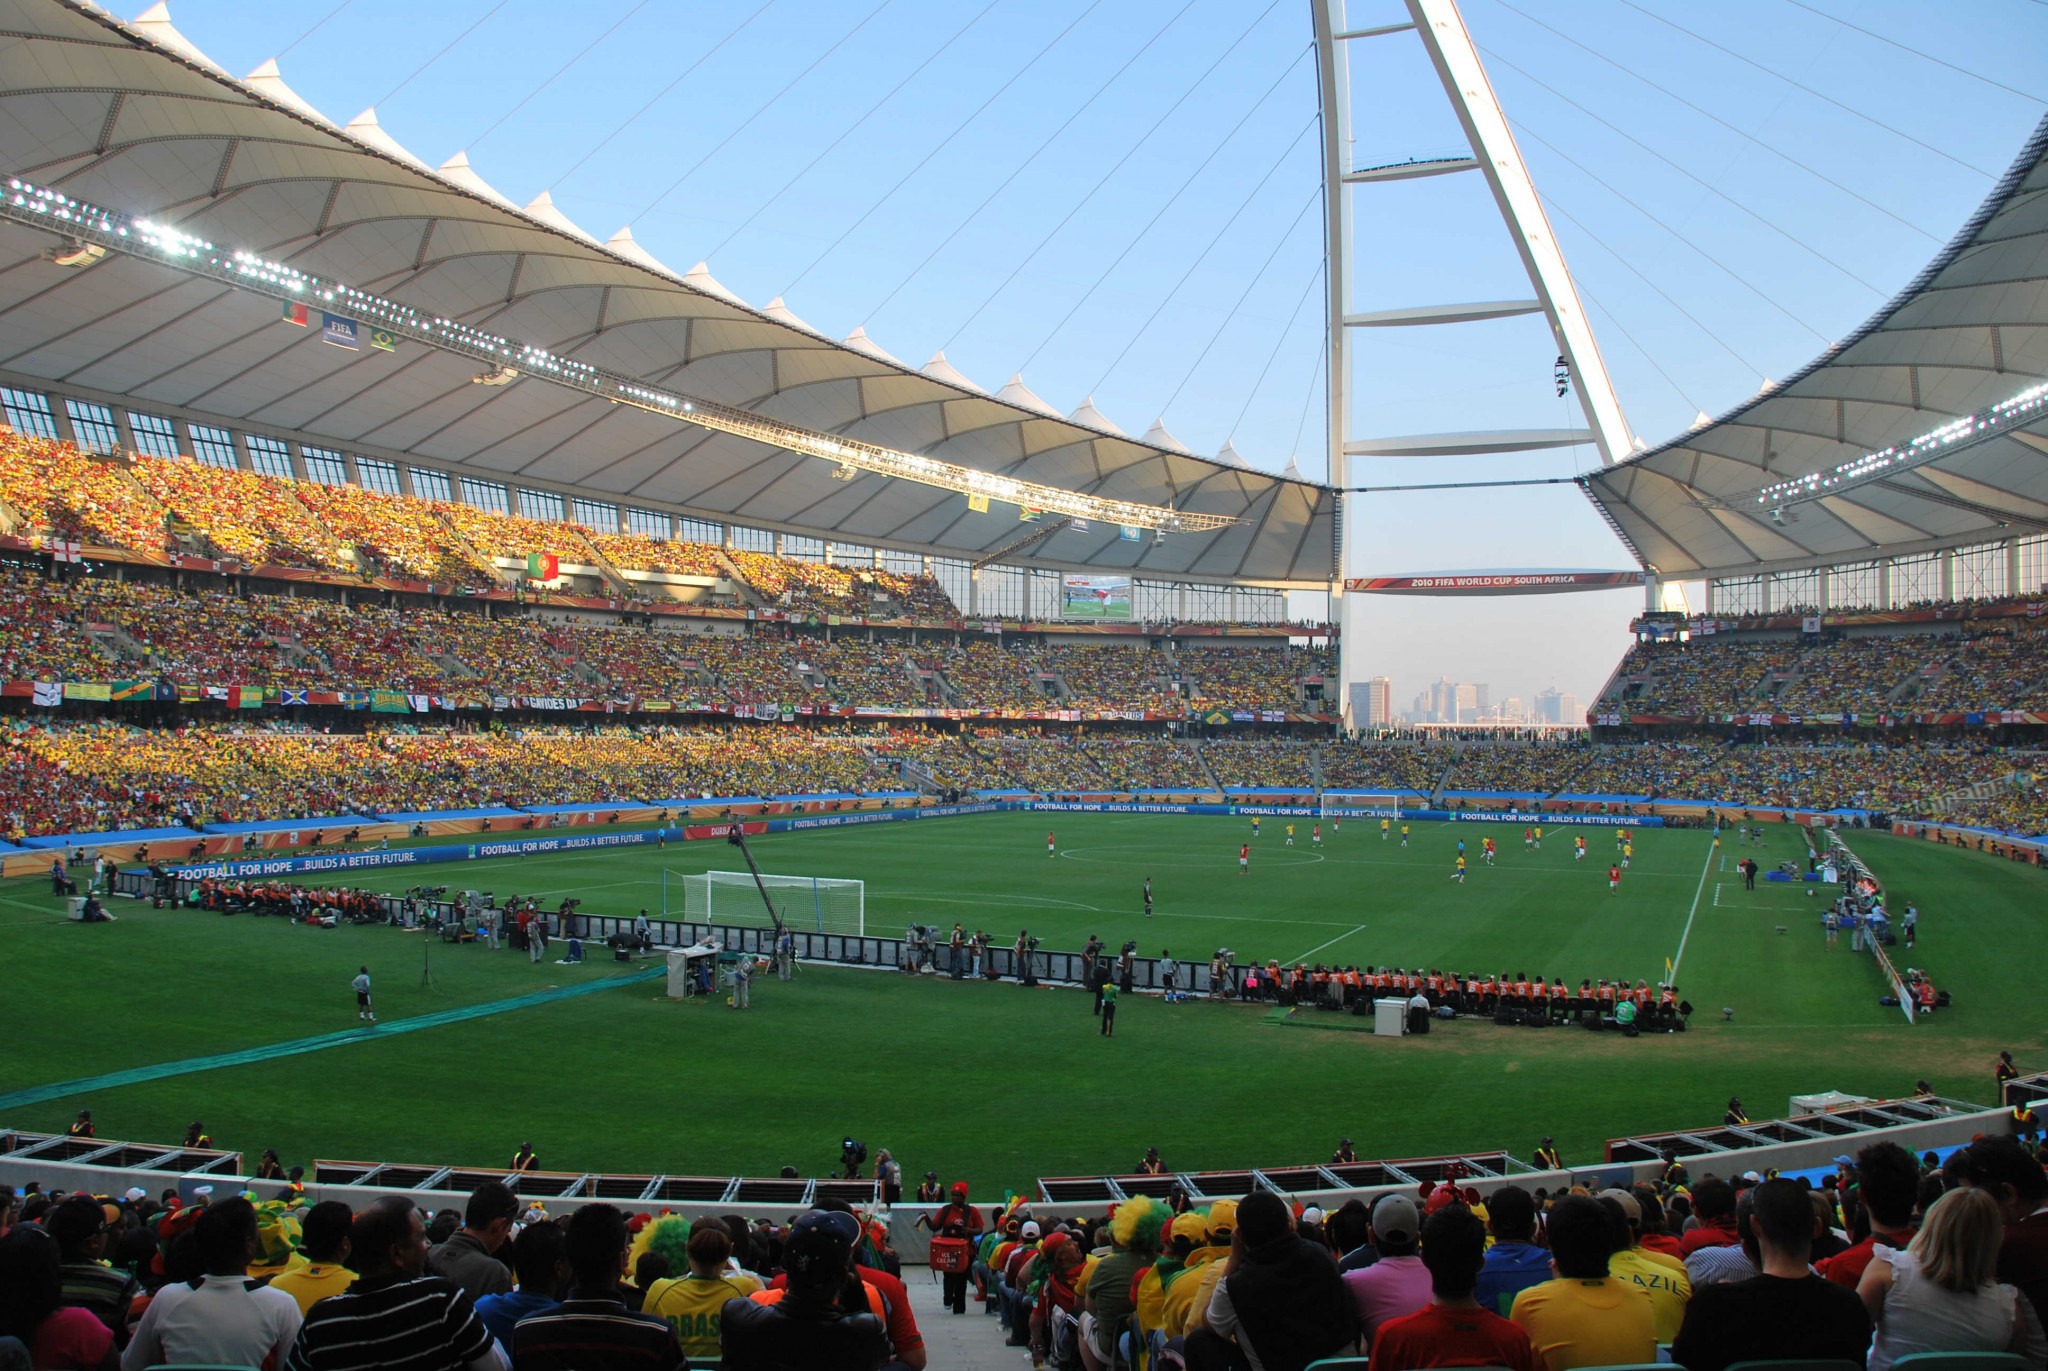 South African Football Association chief executive Russell Paul claimed that facilities built for the 2010 FIFA World Cup should have given them the edge over rivals Egypt to host the 2019 Africa Cup of Nations ©Getty Images